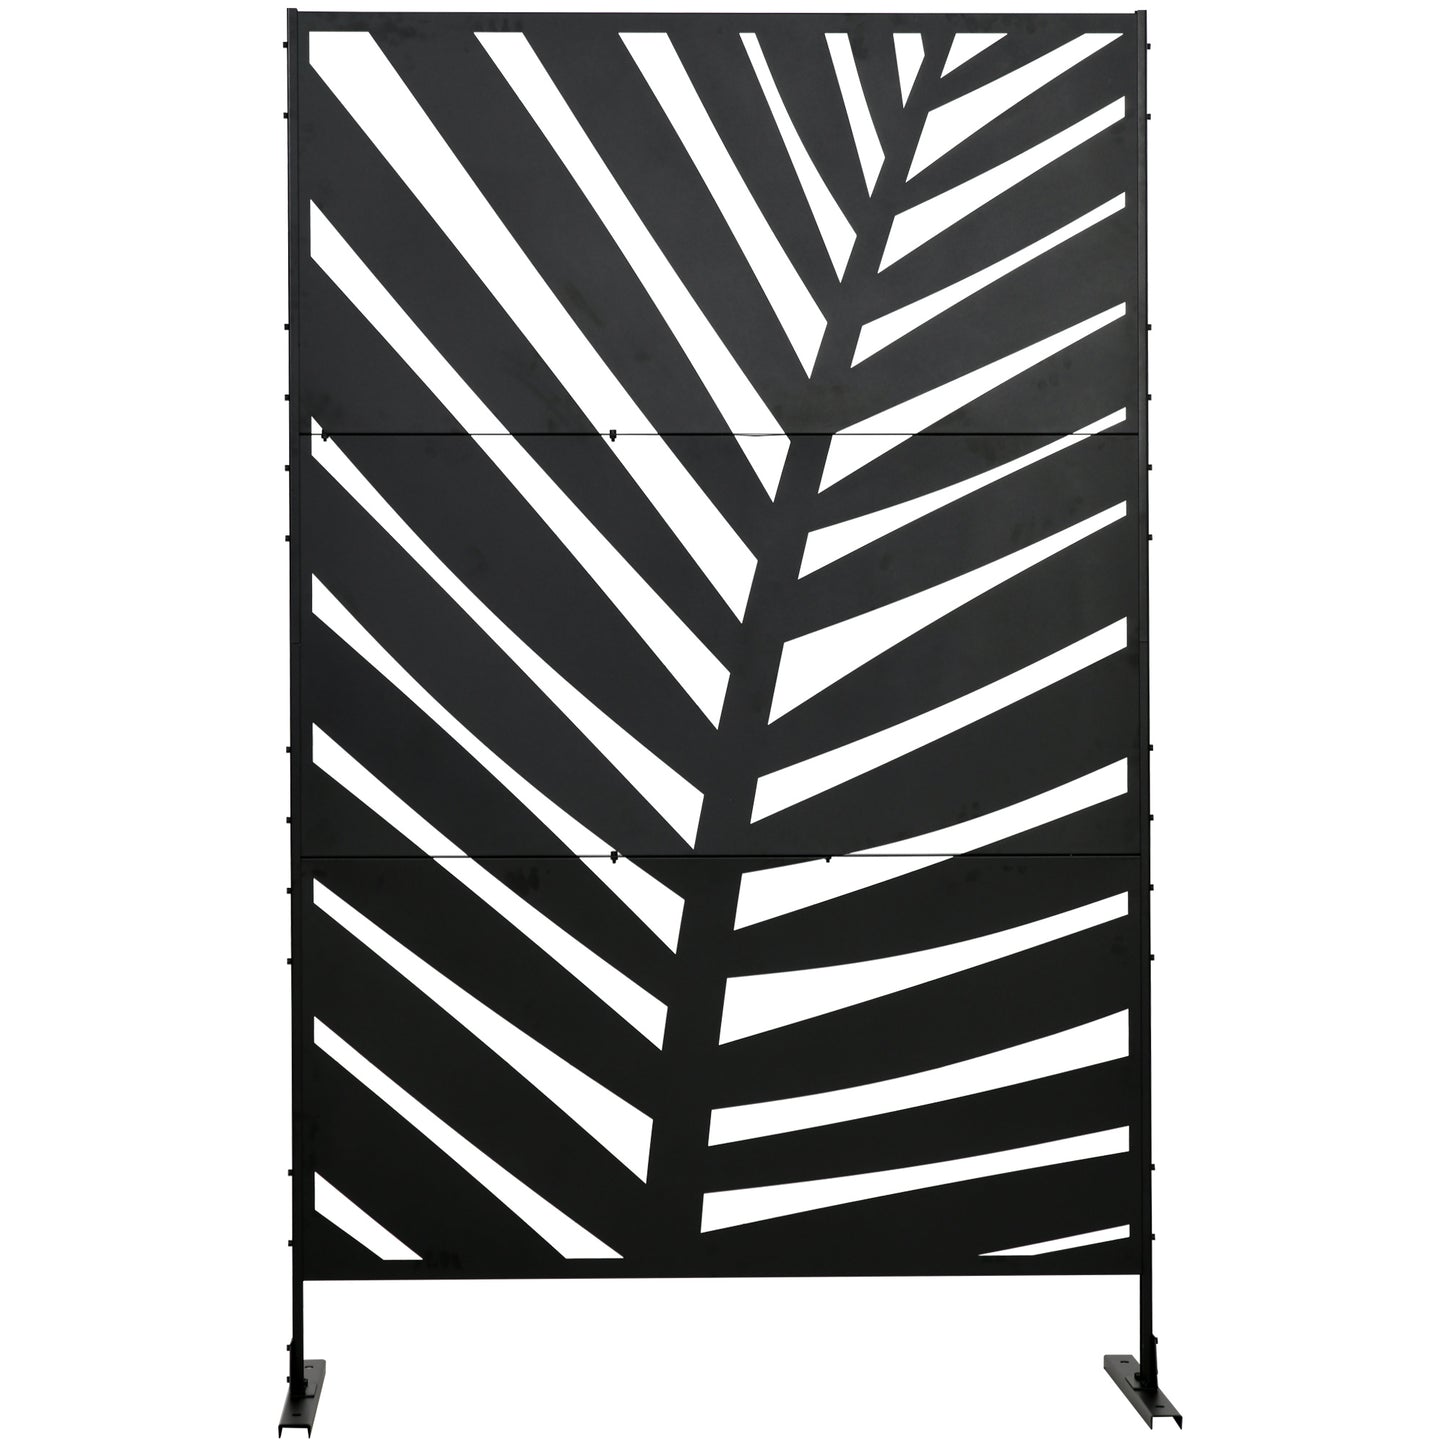 Outsunny Outdoor Privacy Screen with Stand and Ground Stakes, 6.5FT Metal Outdoor Divider, Decorative Privacy Panel for Garden Patio Pool Hot Tub, Banana Leaf Style